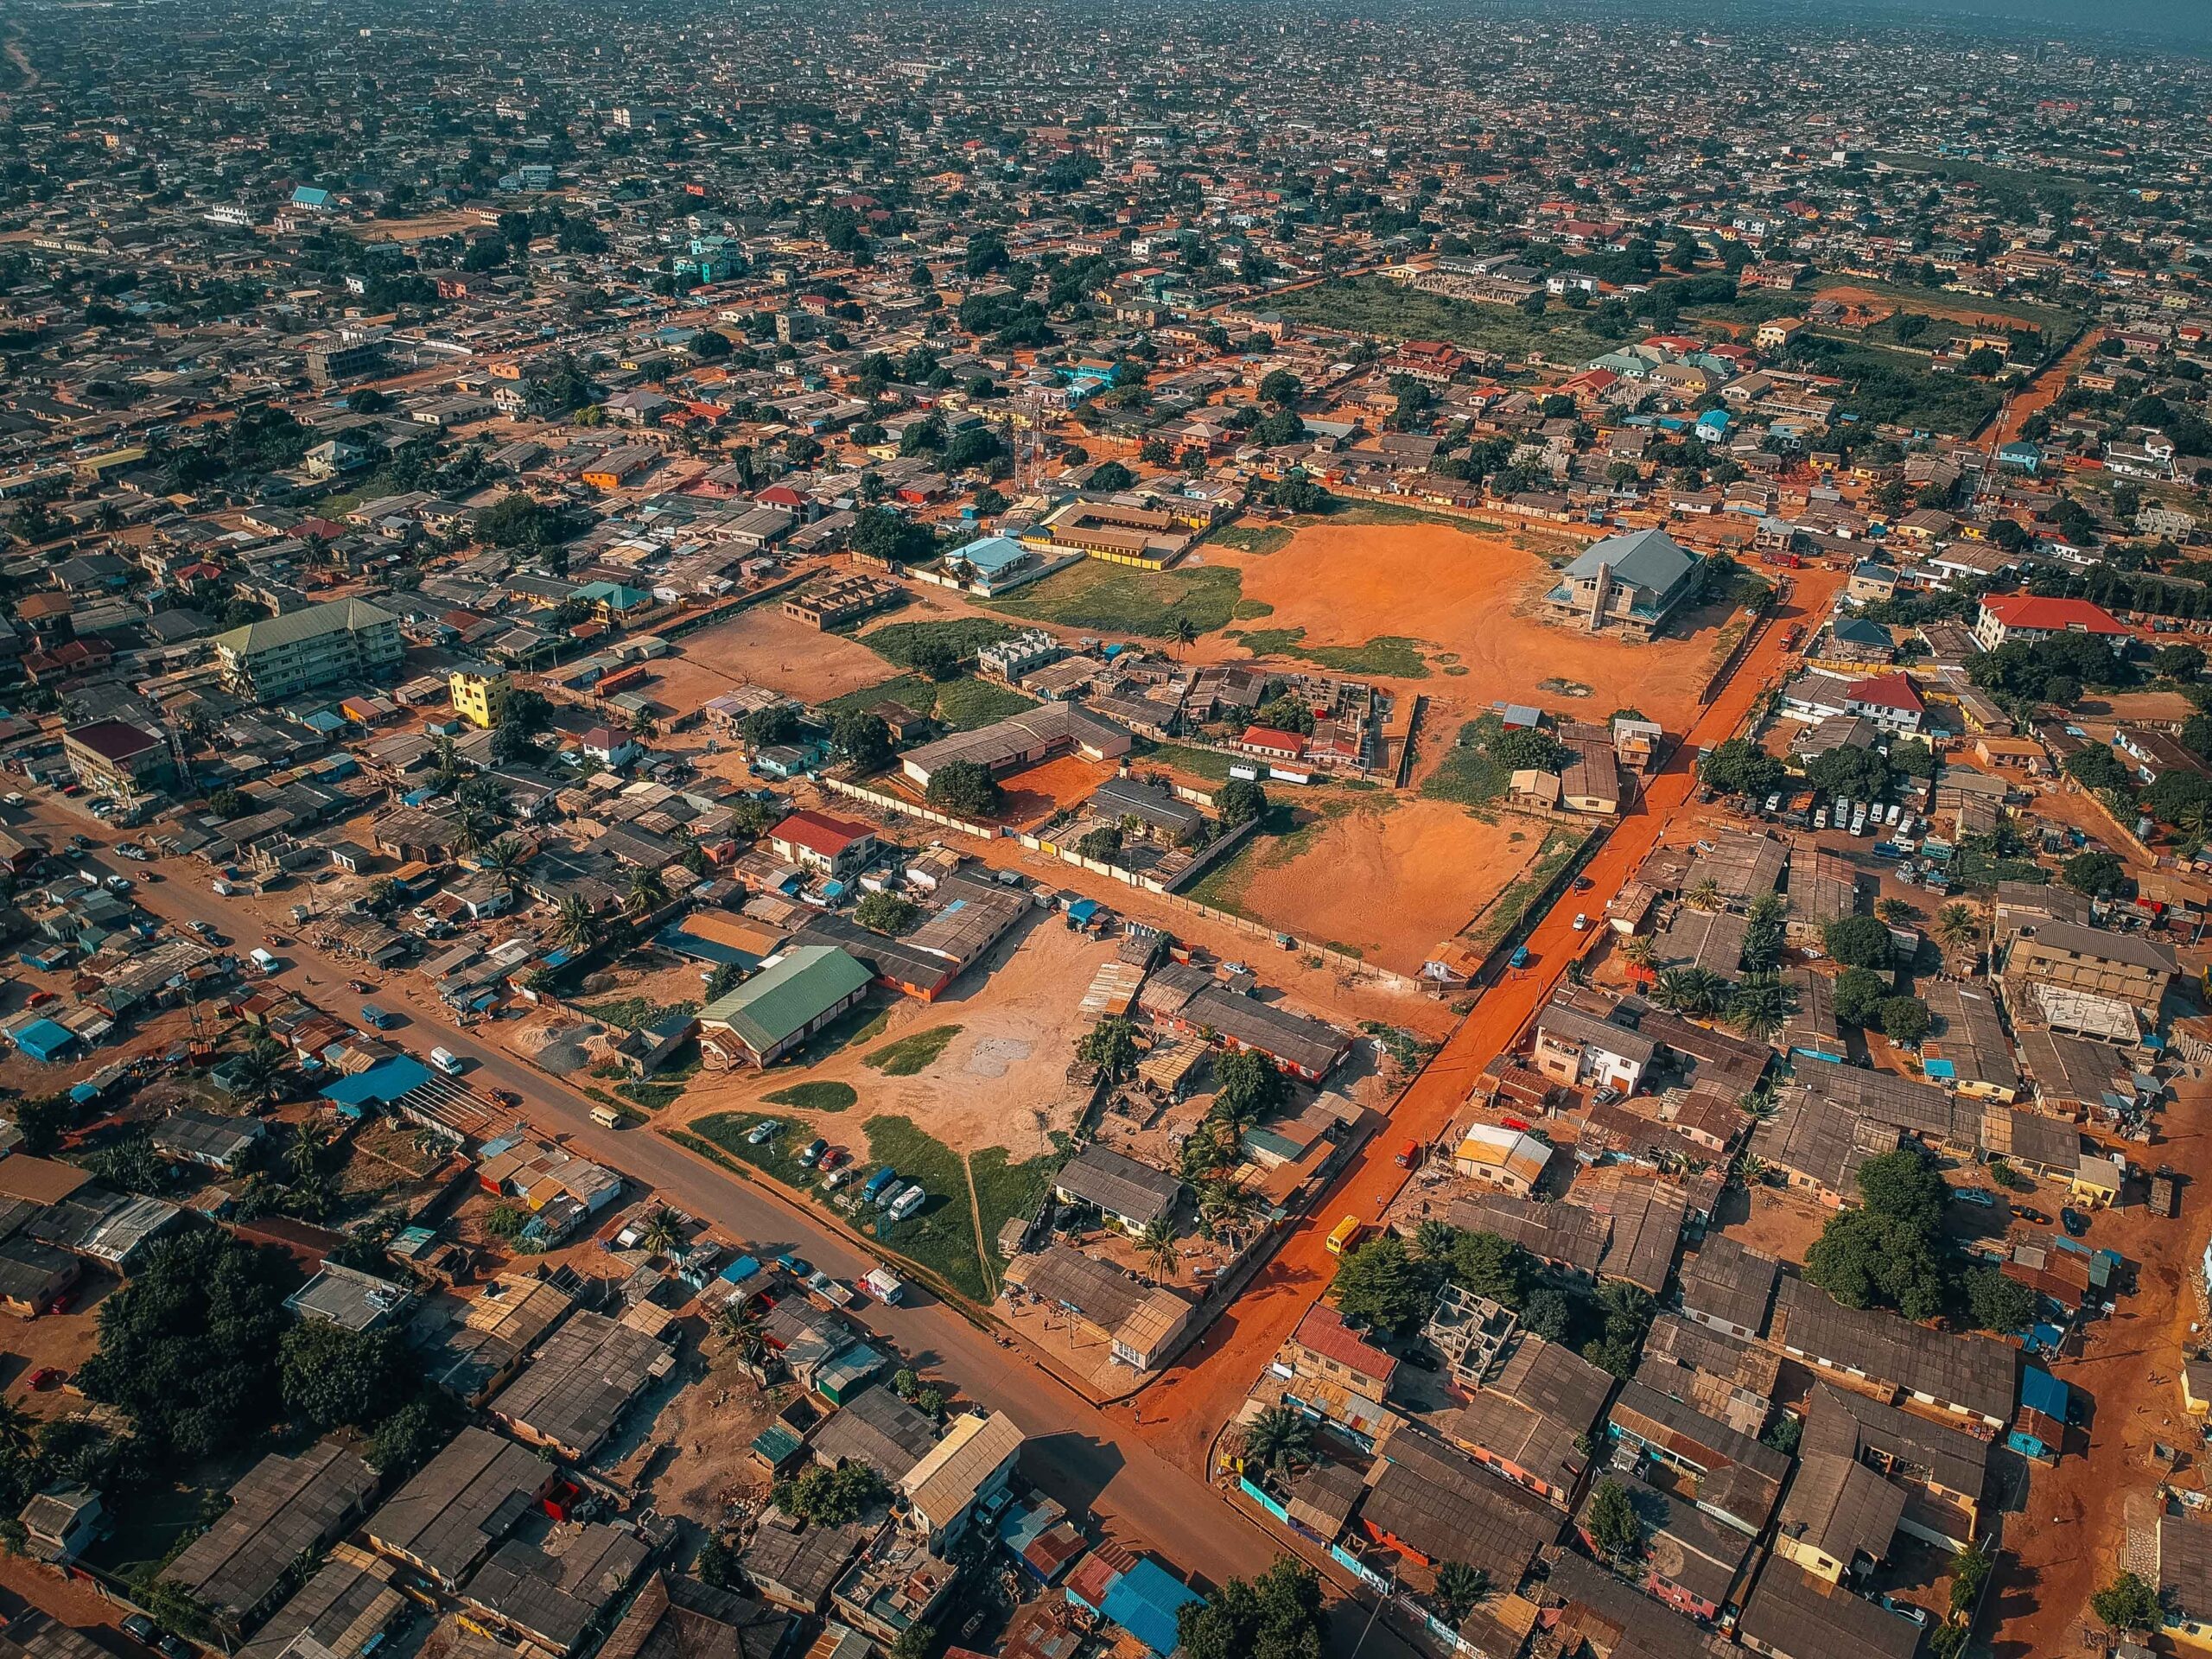 A drone shot of the vast landscape of Ghana, Accra